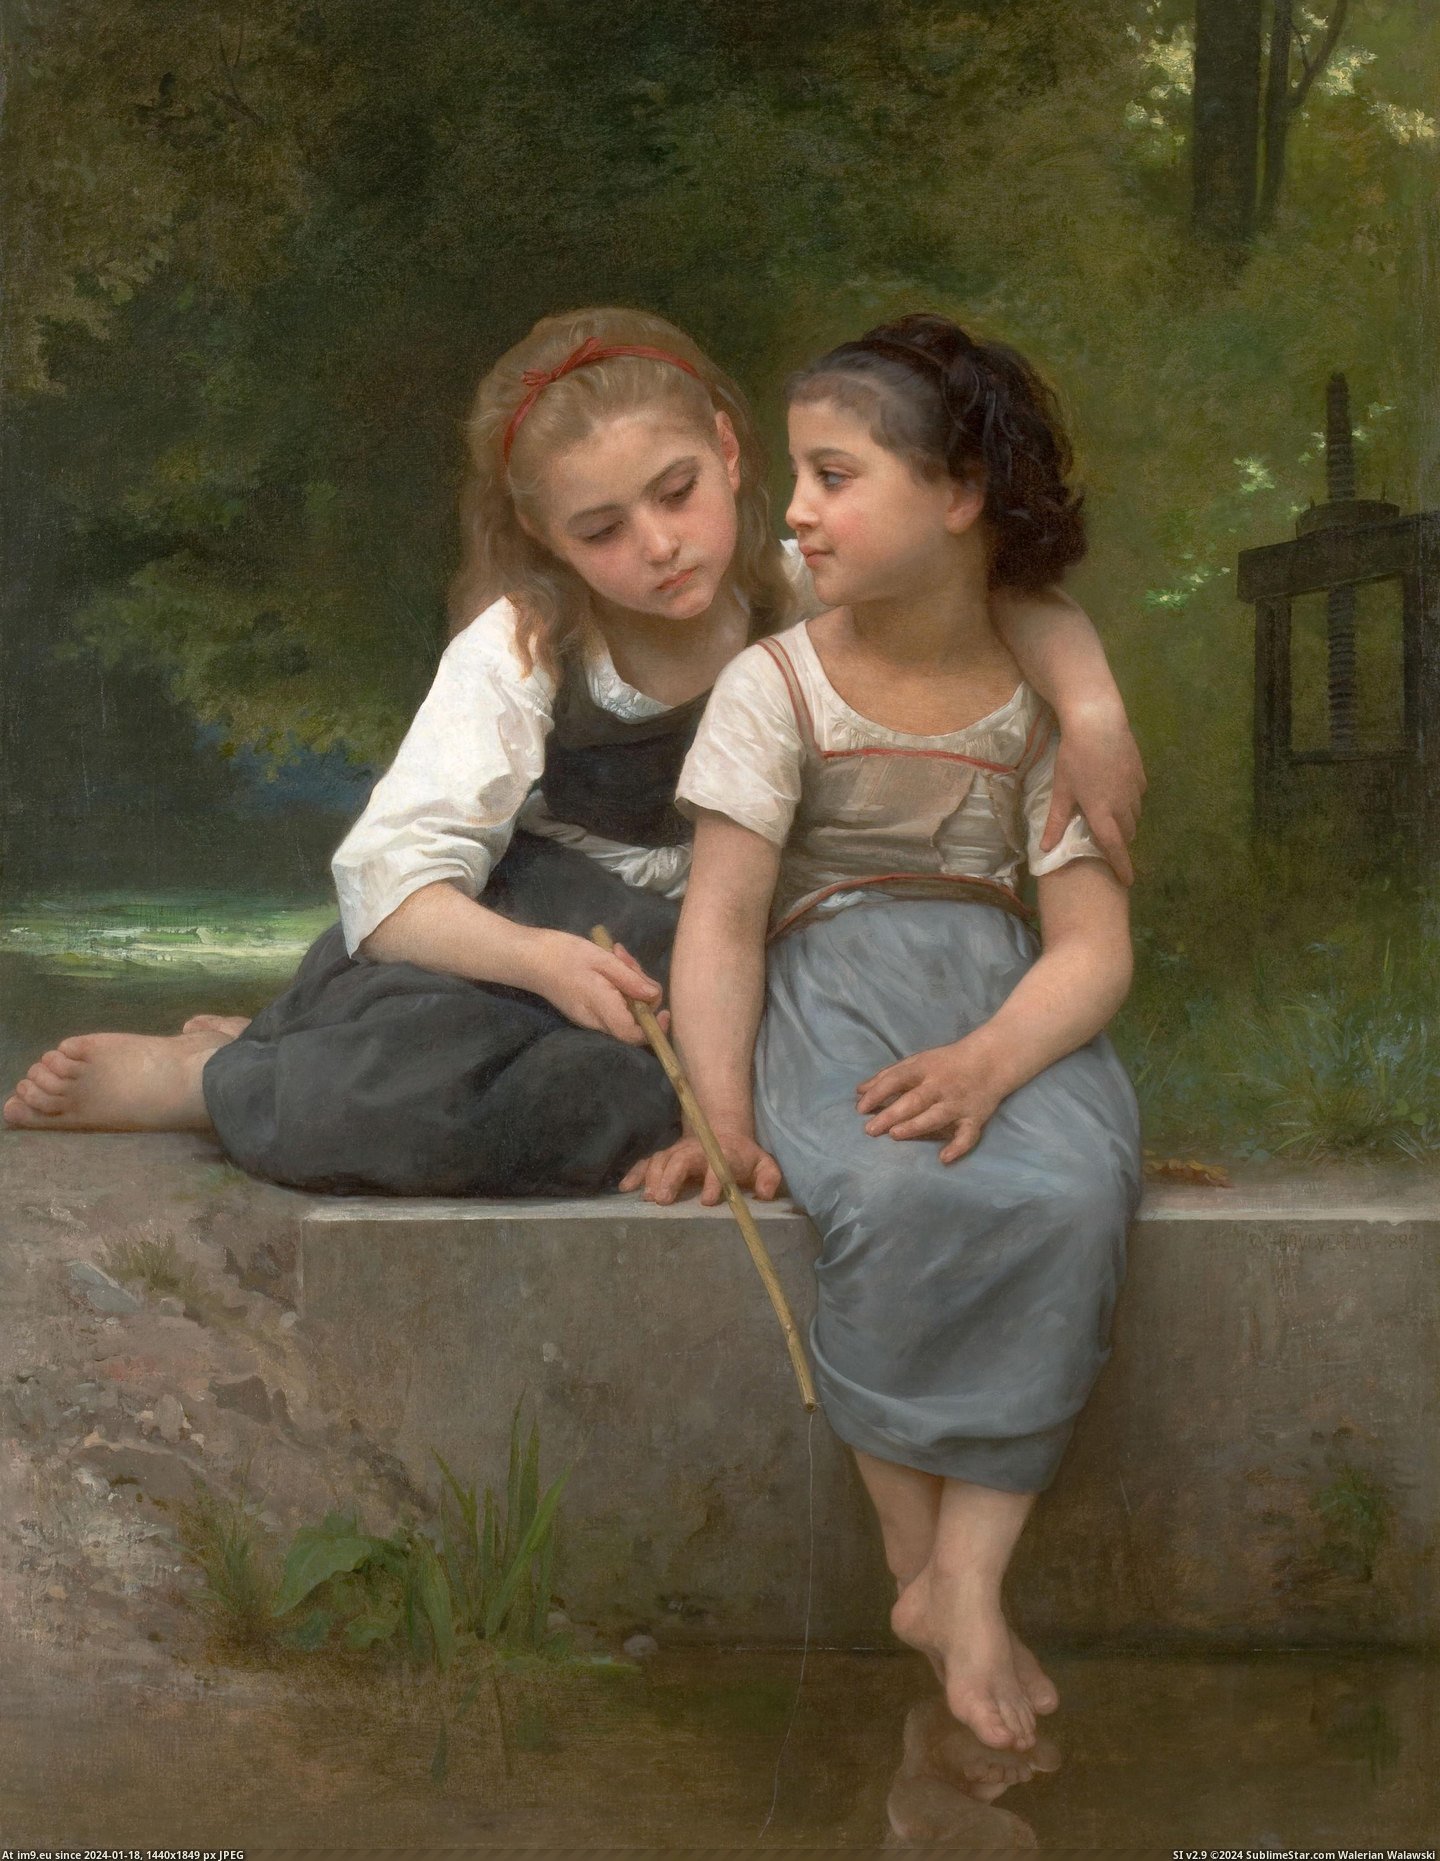 #Art #Painting #Paintings #Fishing #Frogs #William #Bouguereau #Adolphe (1882) Fishing For Frogs - William Adolphe Bouguereau Pic. (Image of album William Adolphe Bouguereau paintings (1825-1905)))